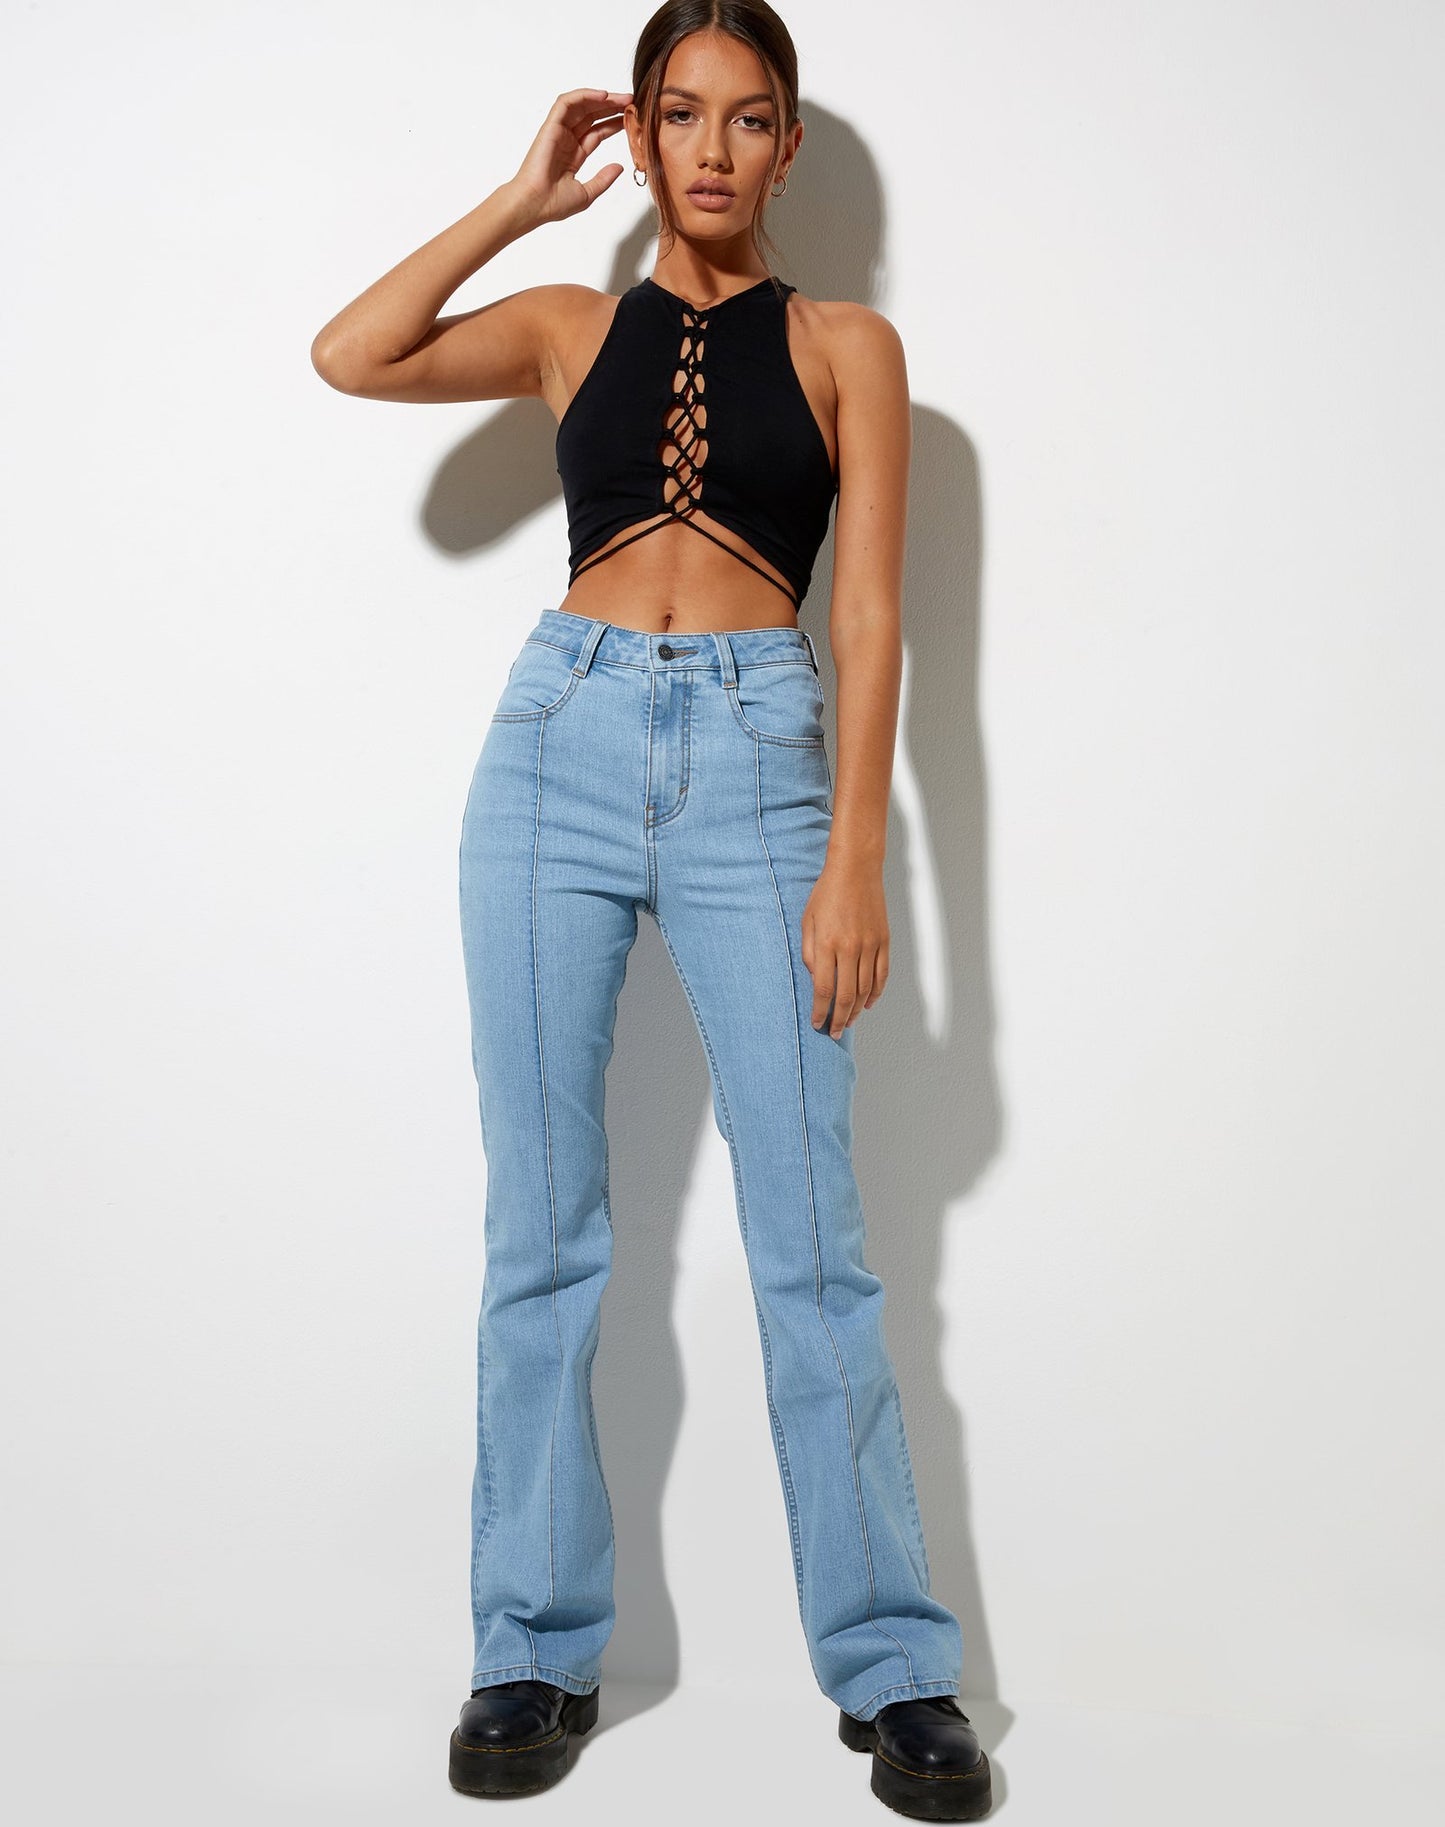 Front Lace Up Crop Top